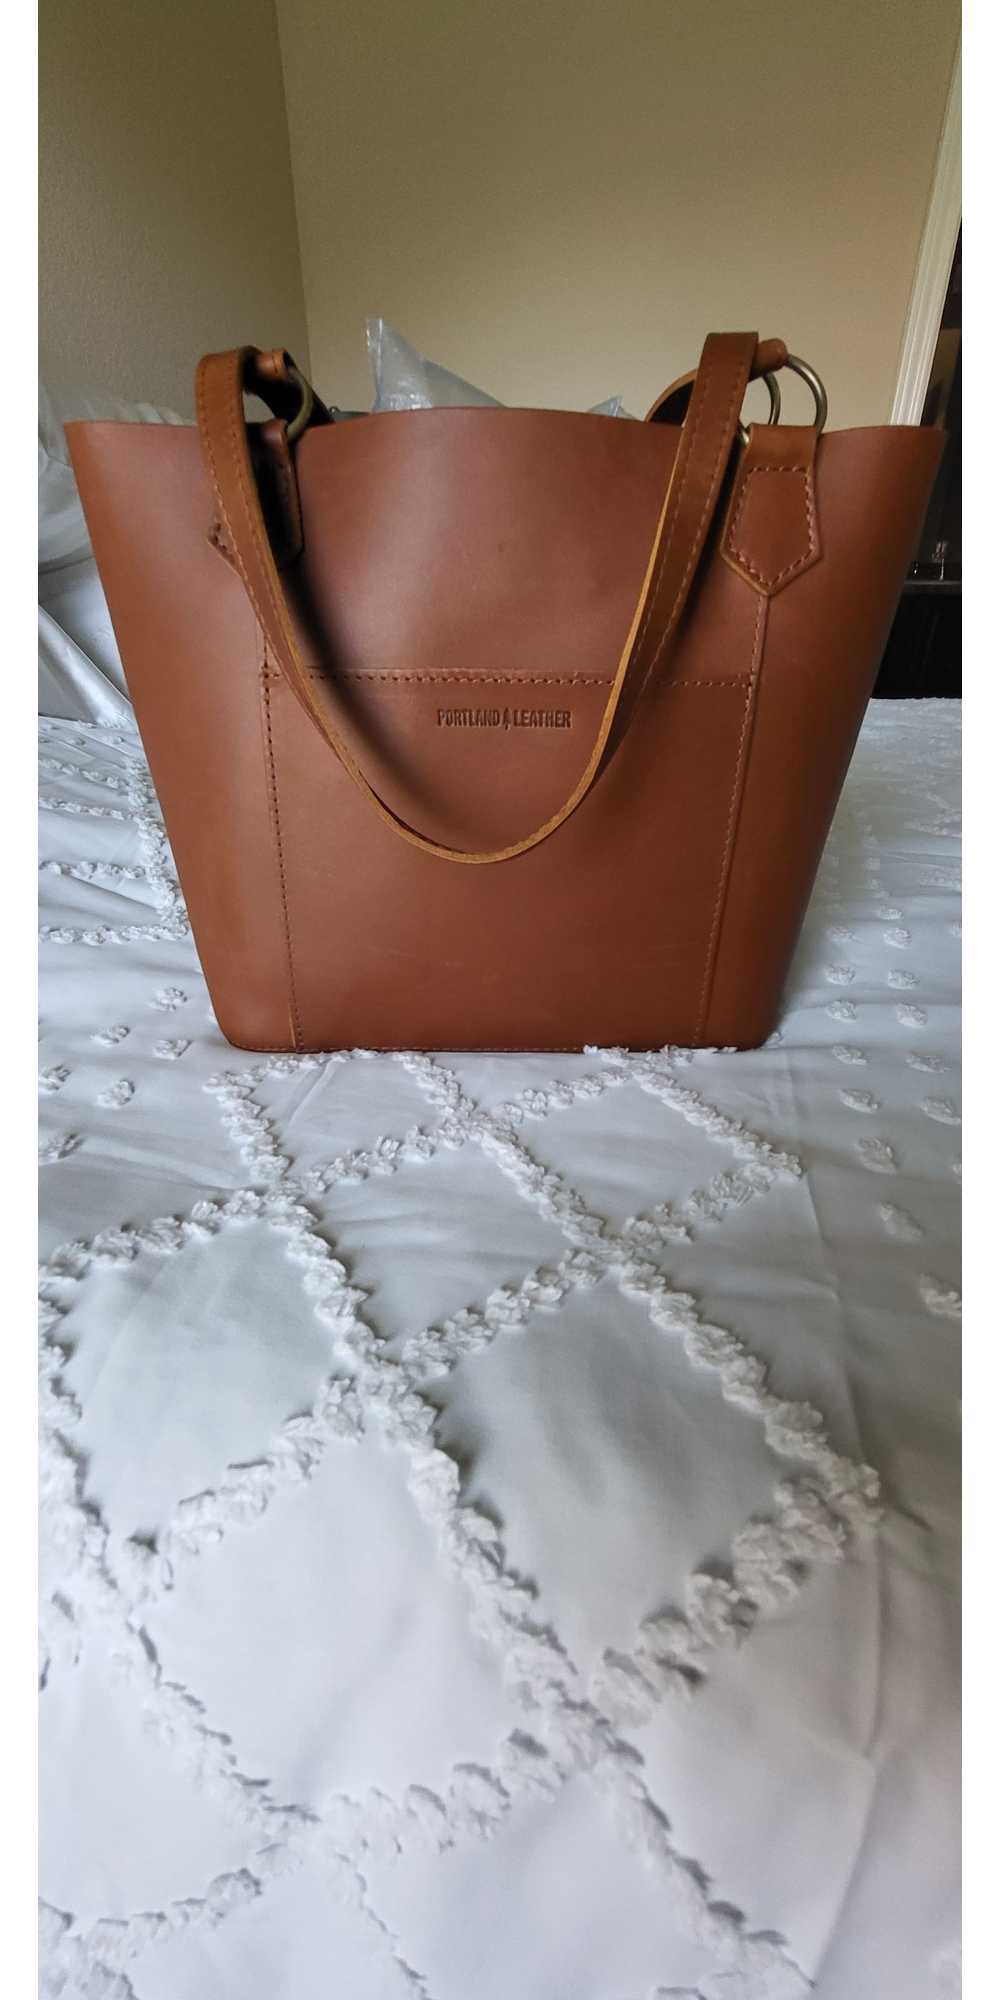 Portland Leather 'Almost Perfect' The Market Tote - image 4